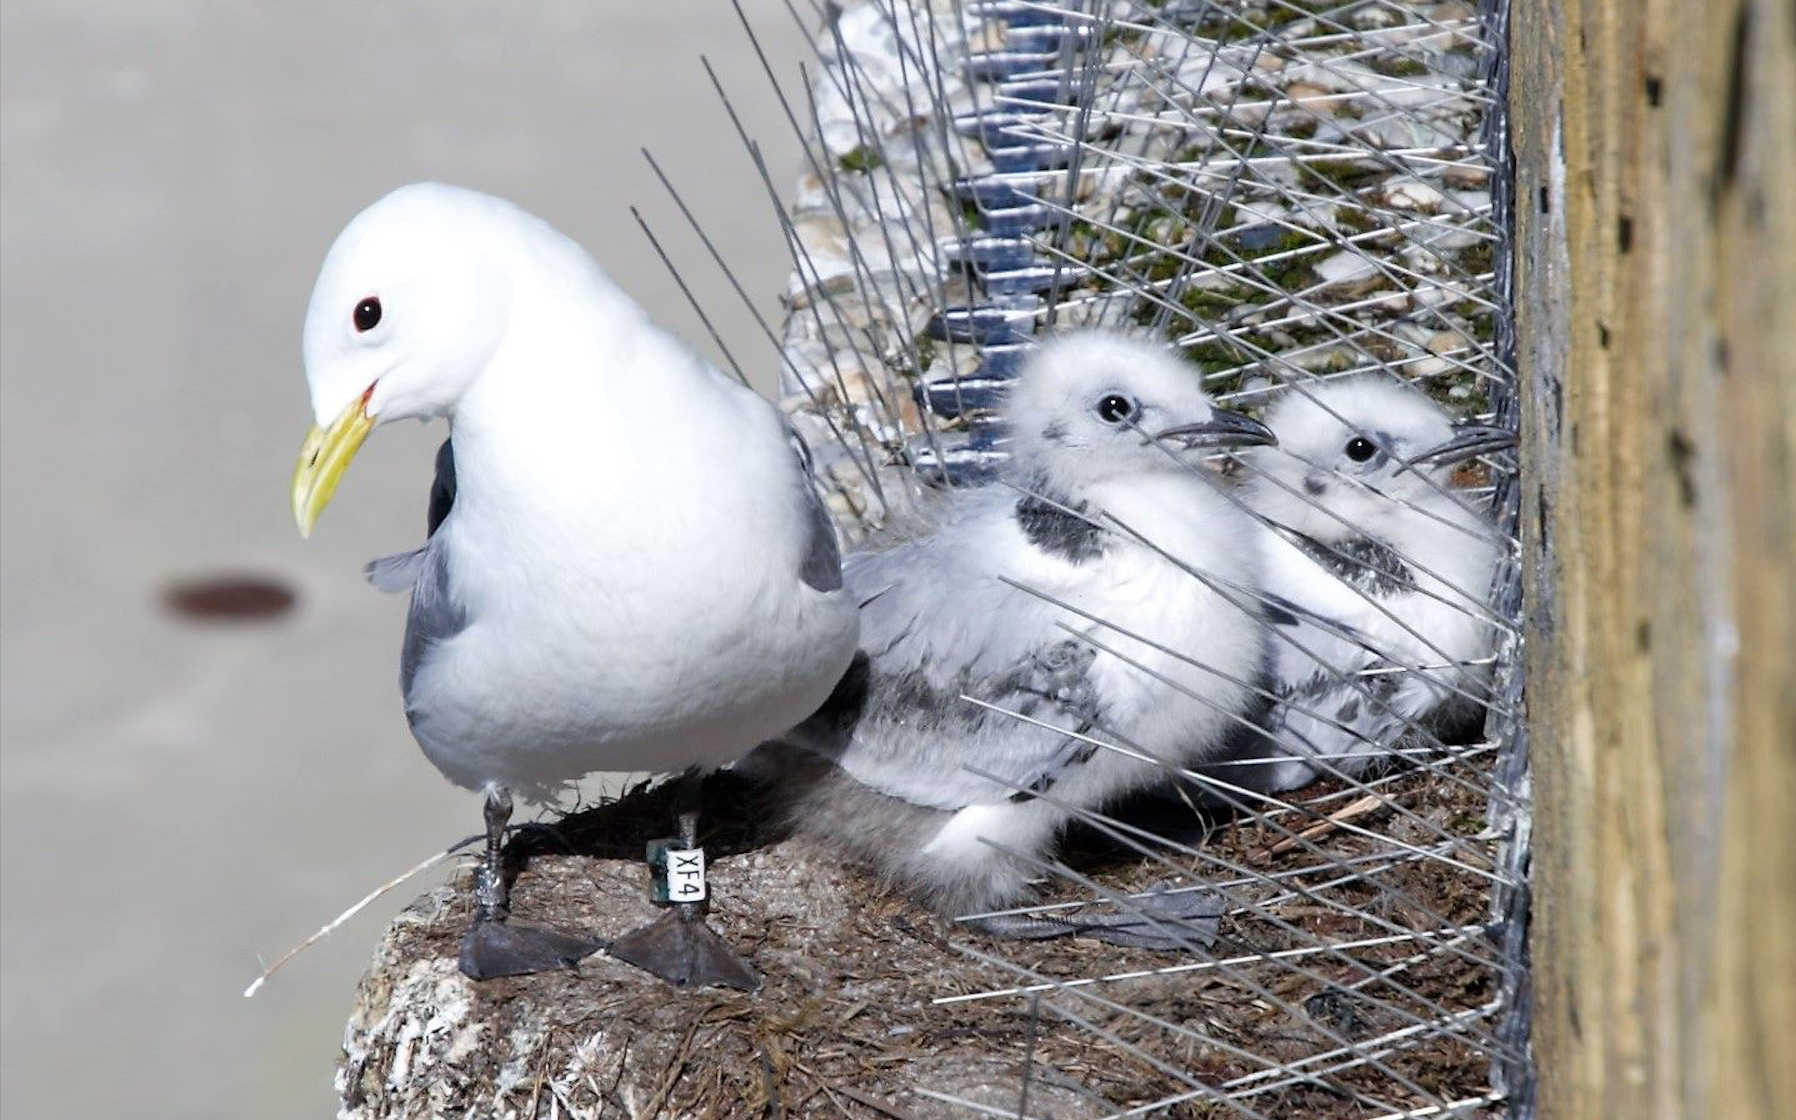 Climate refugees: Kittiwakes flee bird cliffs to resettle in urban spaces - The Independent Barents Observer